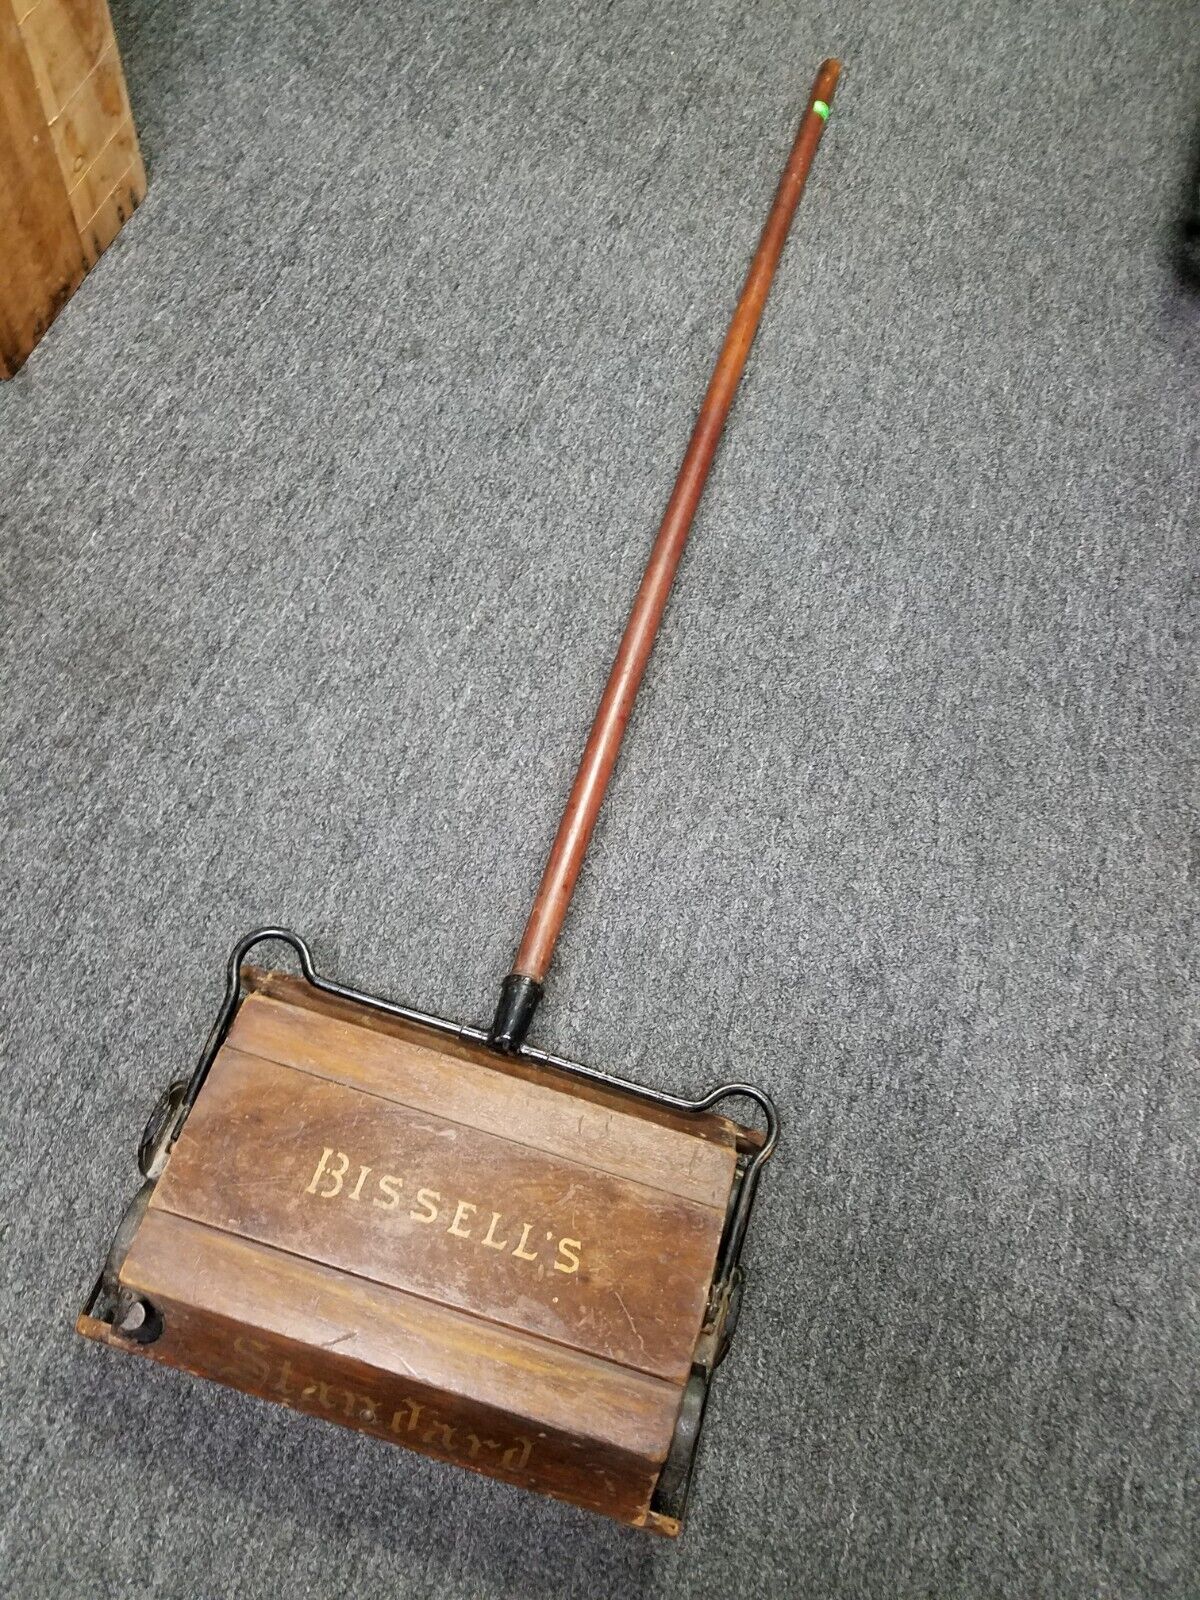 Antique Vintage Bissell\'s Standard Wood Manual Carpet Sweeper with Pole